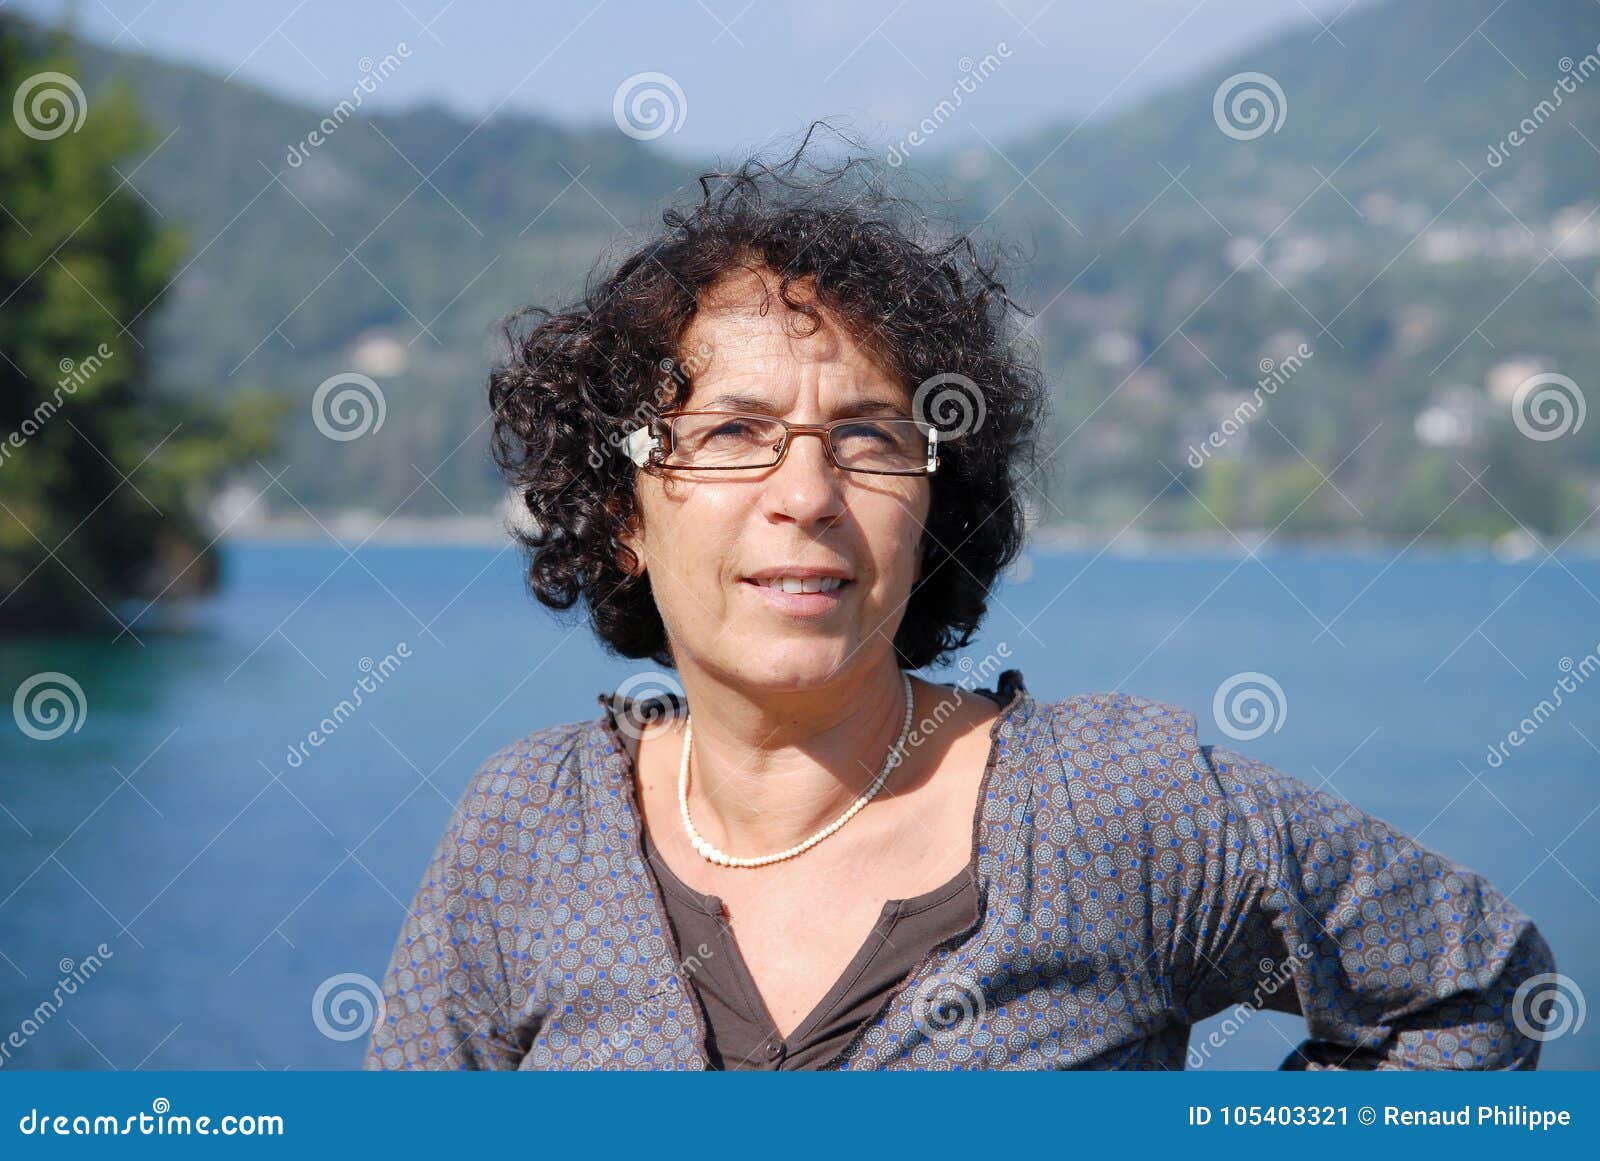 Portrait Of Brunette Mature Woman With Eyeglasses Stock Image Image